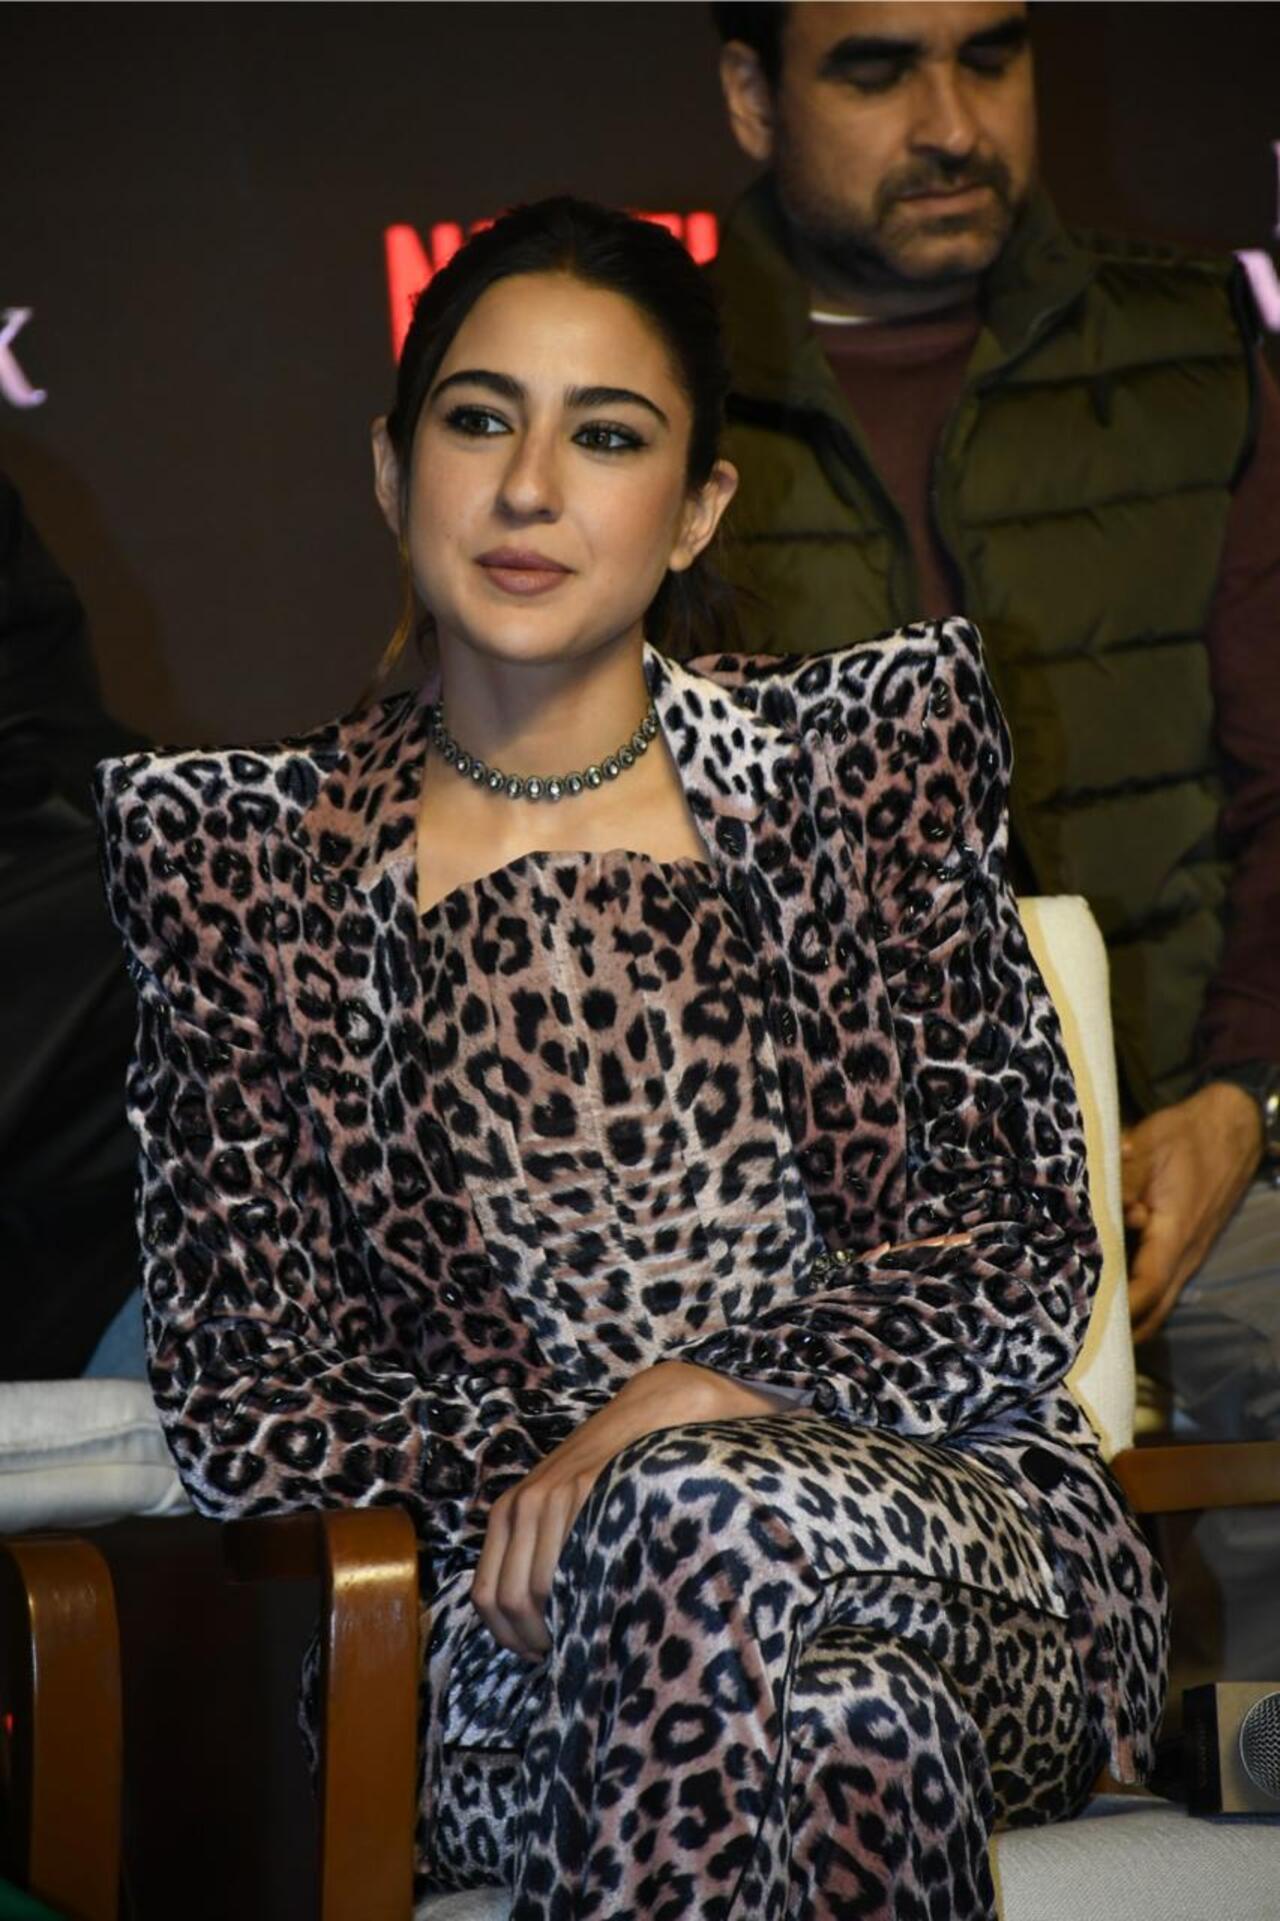 At the event, Sara Ali Khan also addressed the similarities and differences between her character and herself. “She is quite different to me. I can say that both me and Bambi Todi have been born maybe in a world of privilege. The main difference is that Bambi is oblivious to her privilege in a certain way. She just expects it to be that way because she doesn’t know any better,